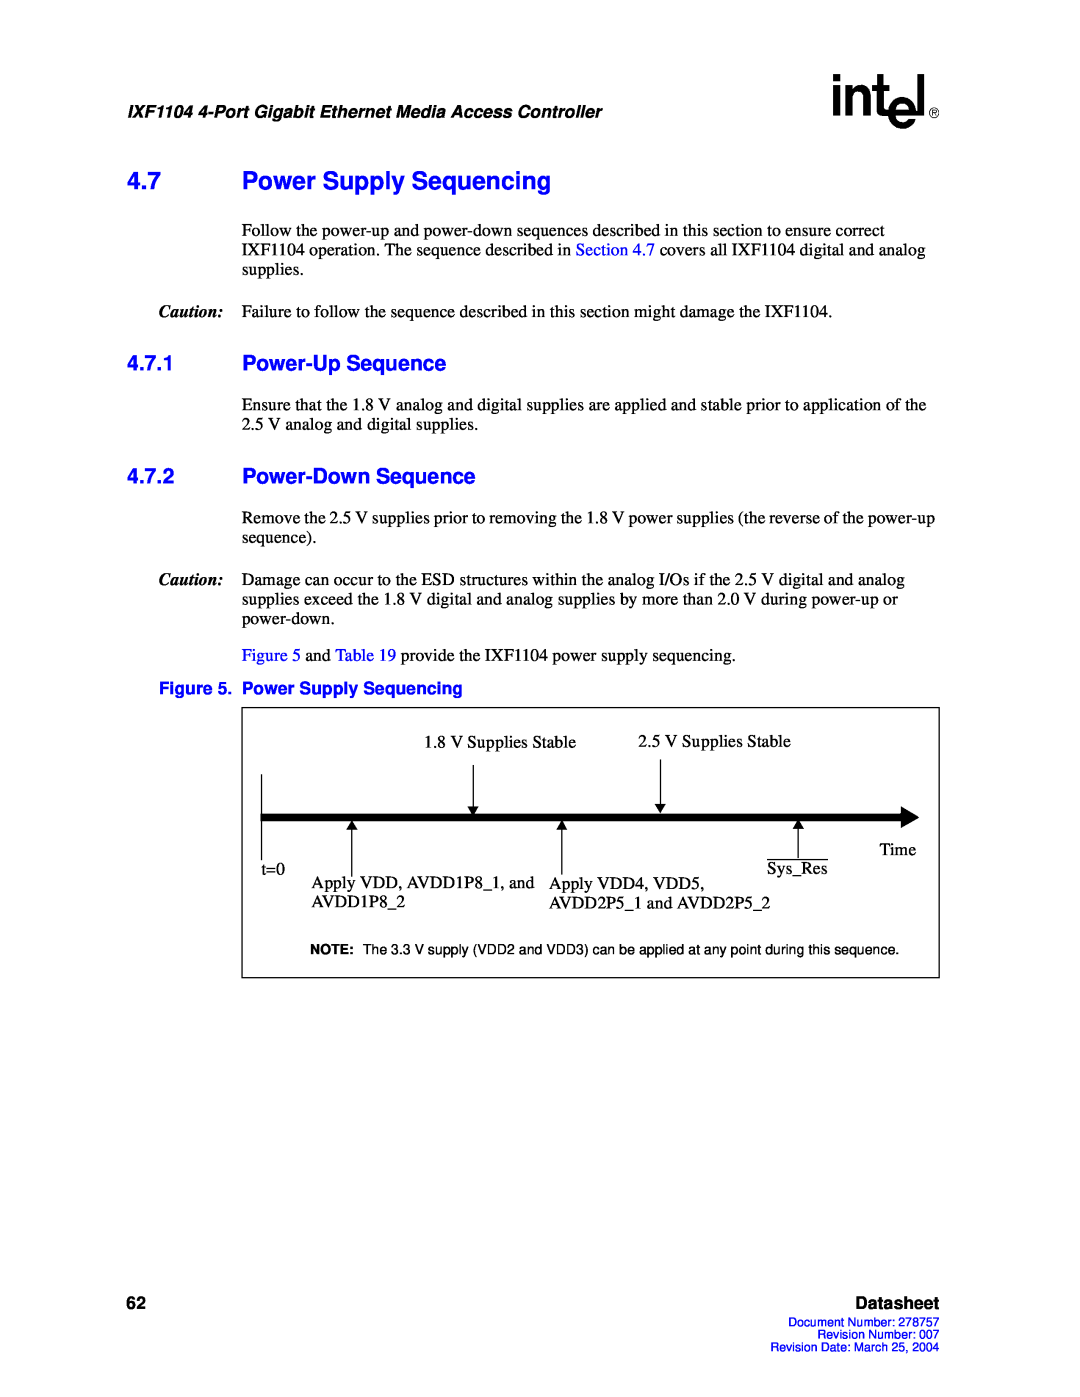 Intel IXF1104 manual 4.7Power Supply Sequencing, 4.7.1Power-UpSequence, 4.7.2Power-DownSequence, Datasheet 